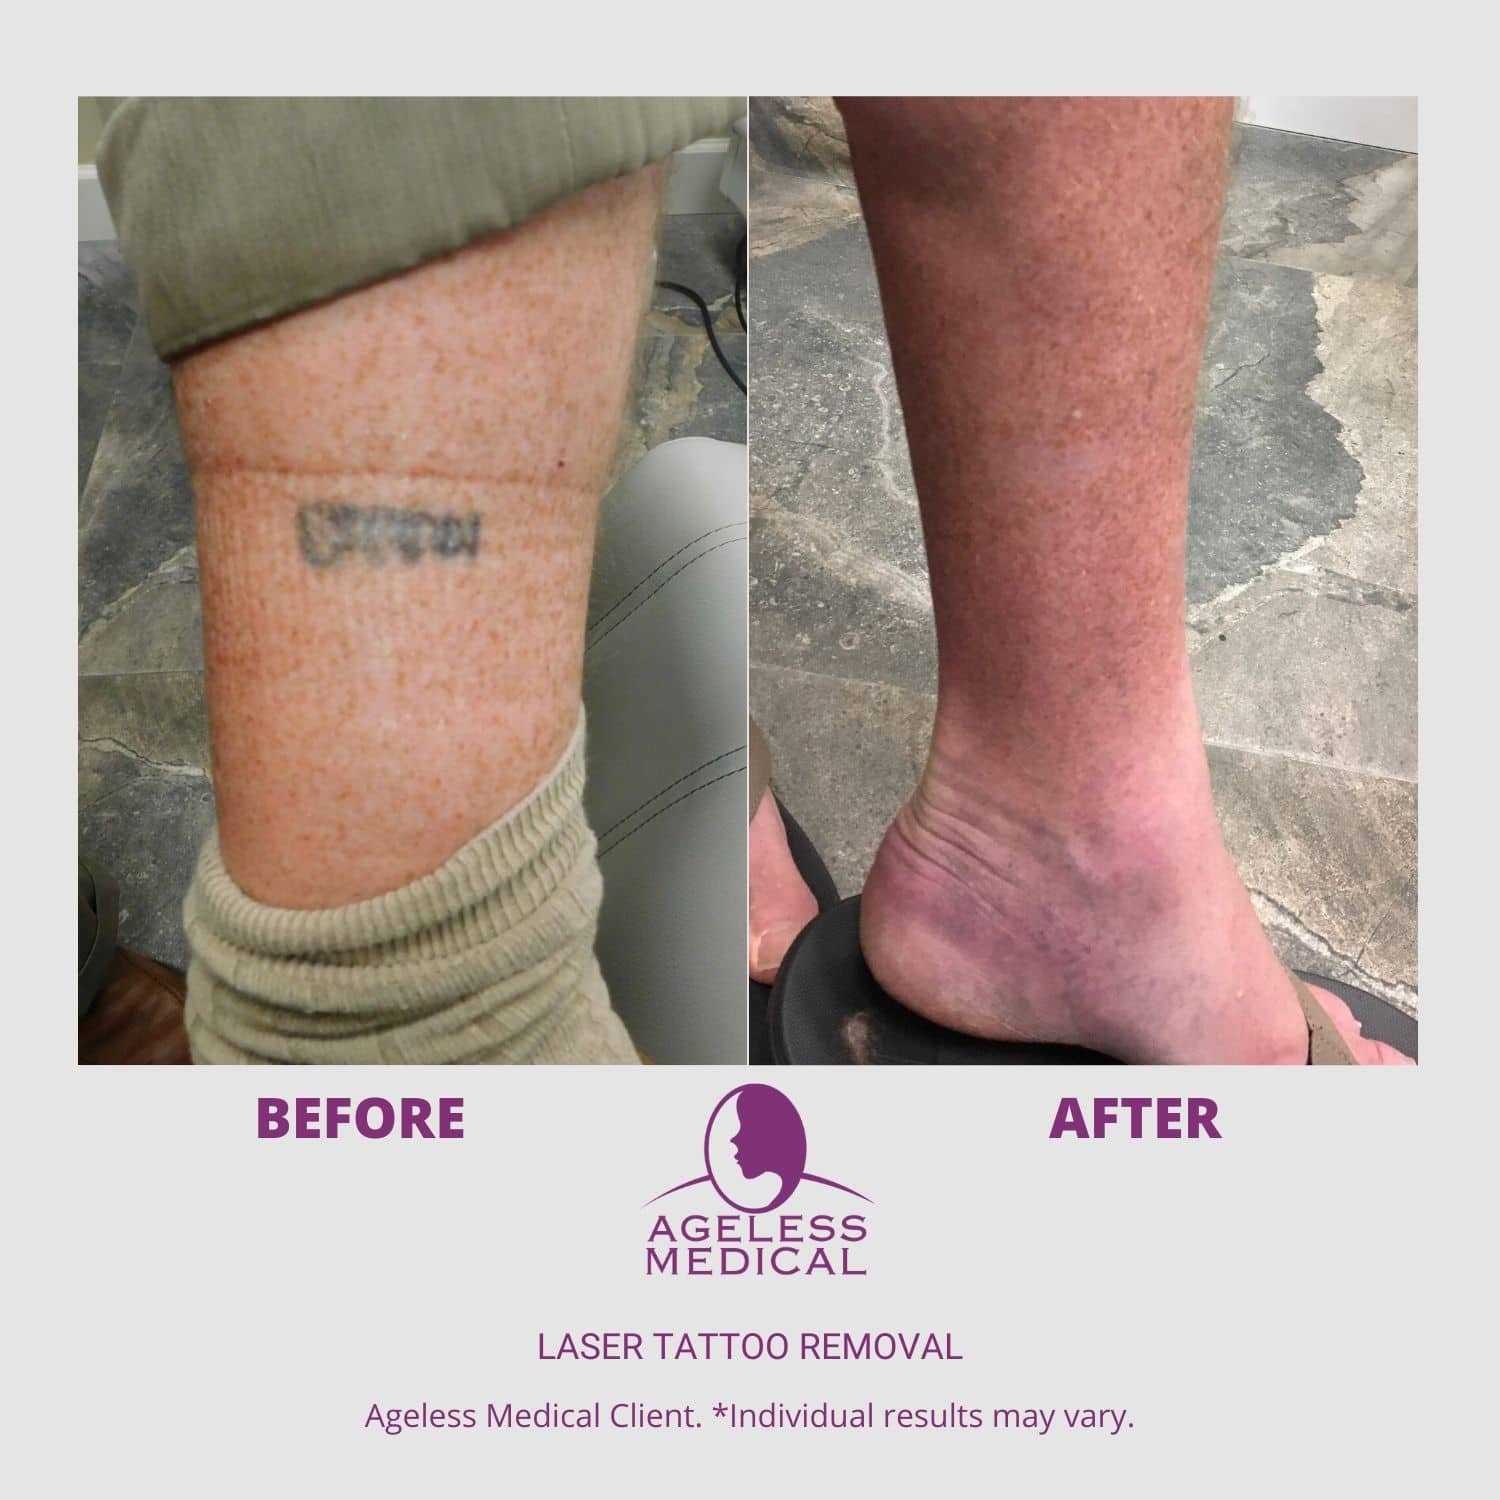 laser tatoo removal treatment at our dermatologists office in Kansas City  treating laser tatoo removal